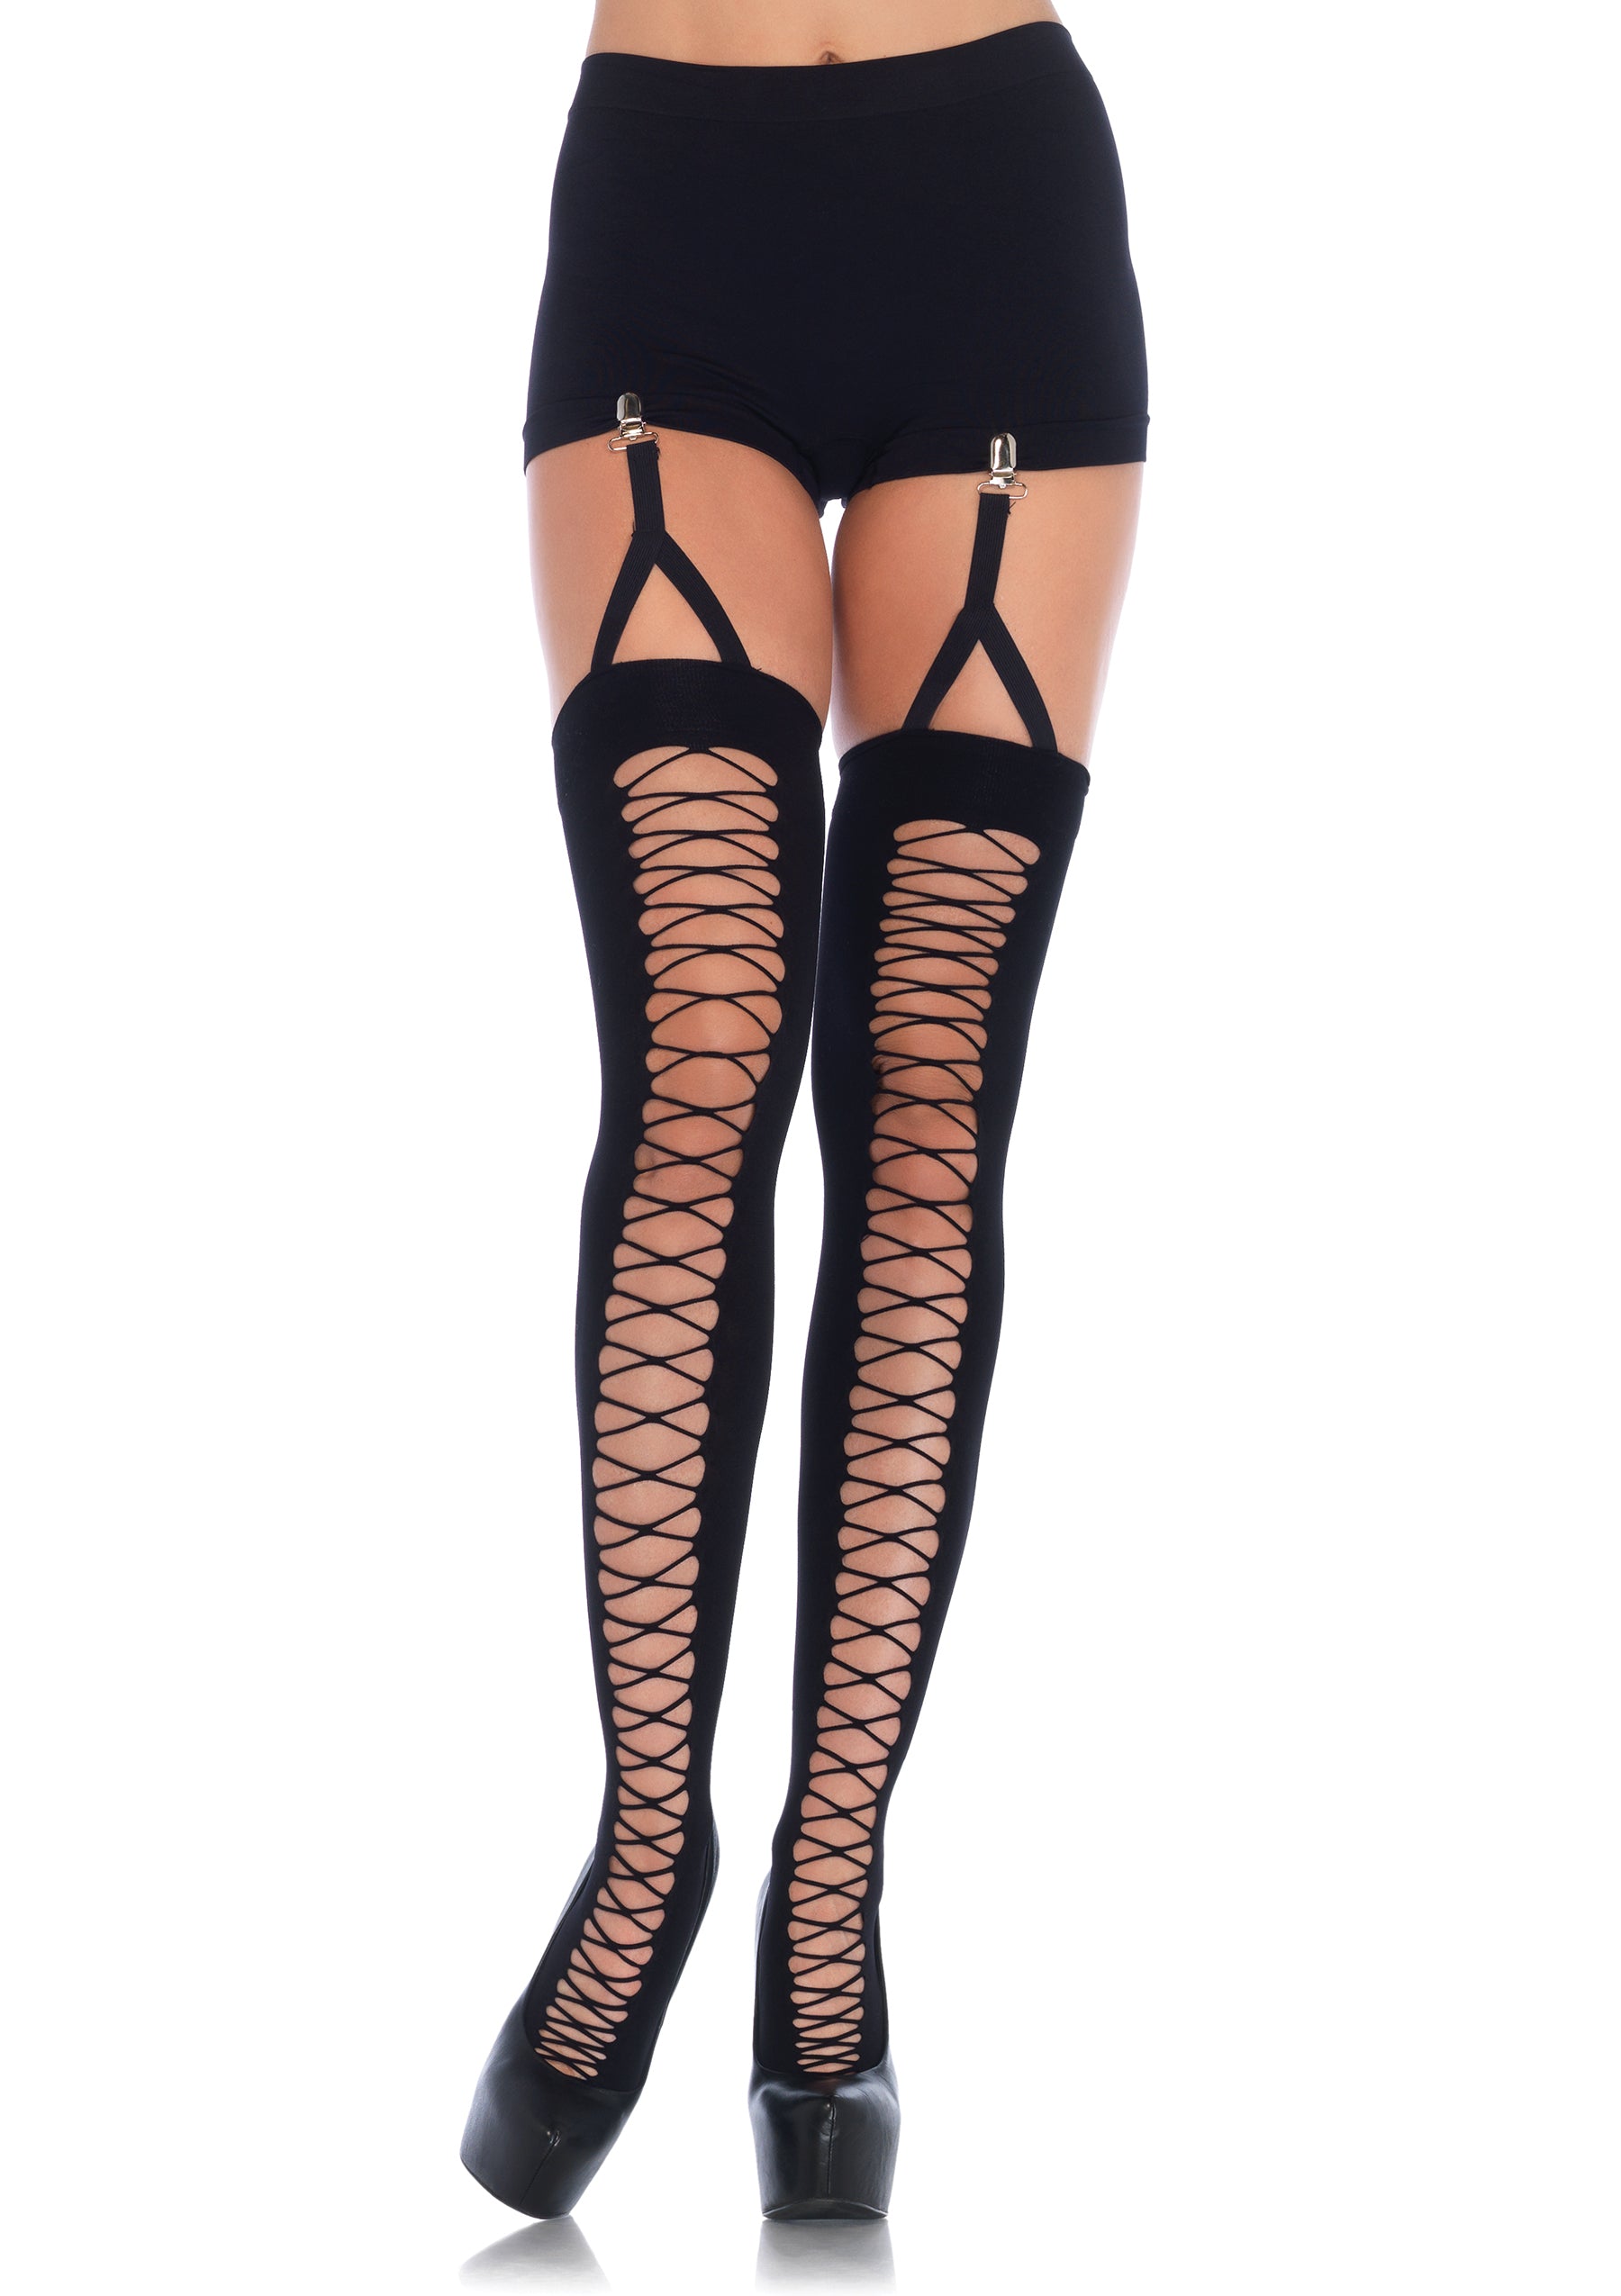 Lace Up Illusion Thigh Highs - One Size LA-6635